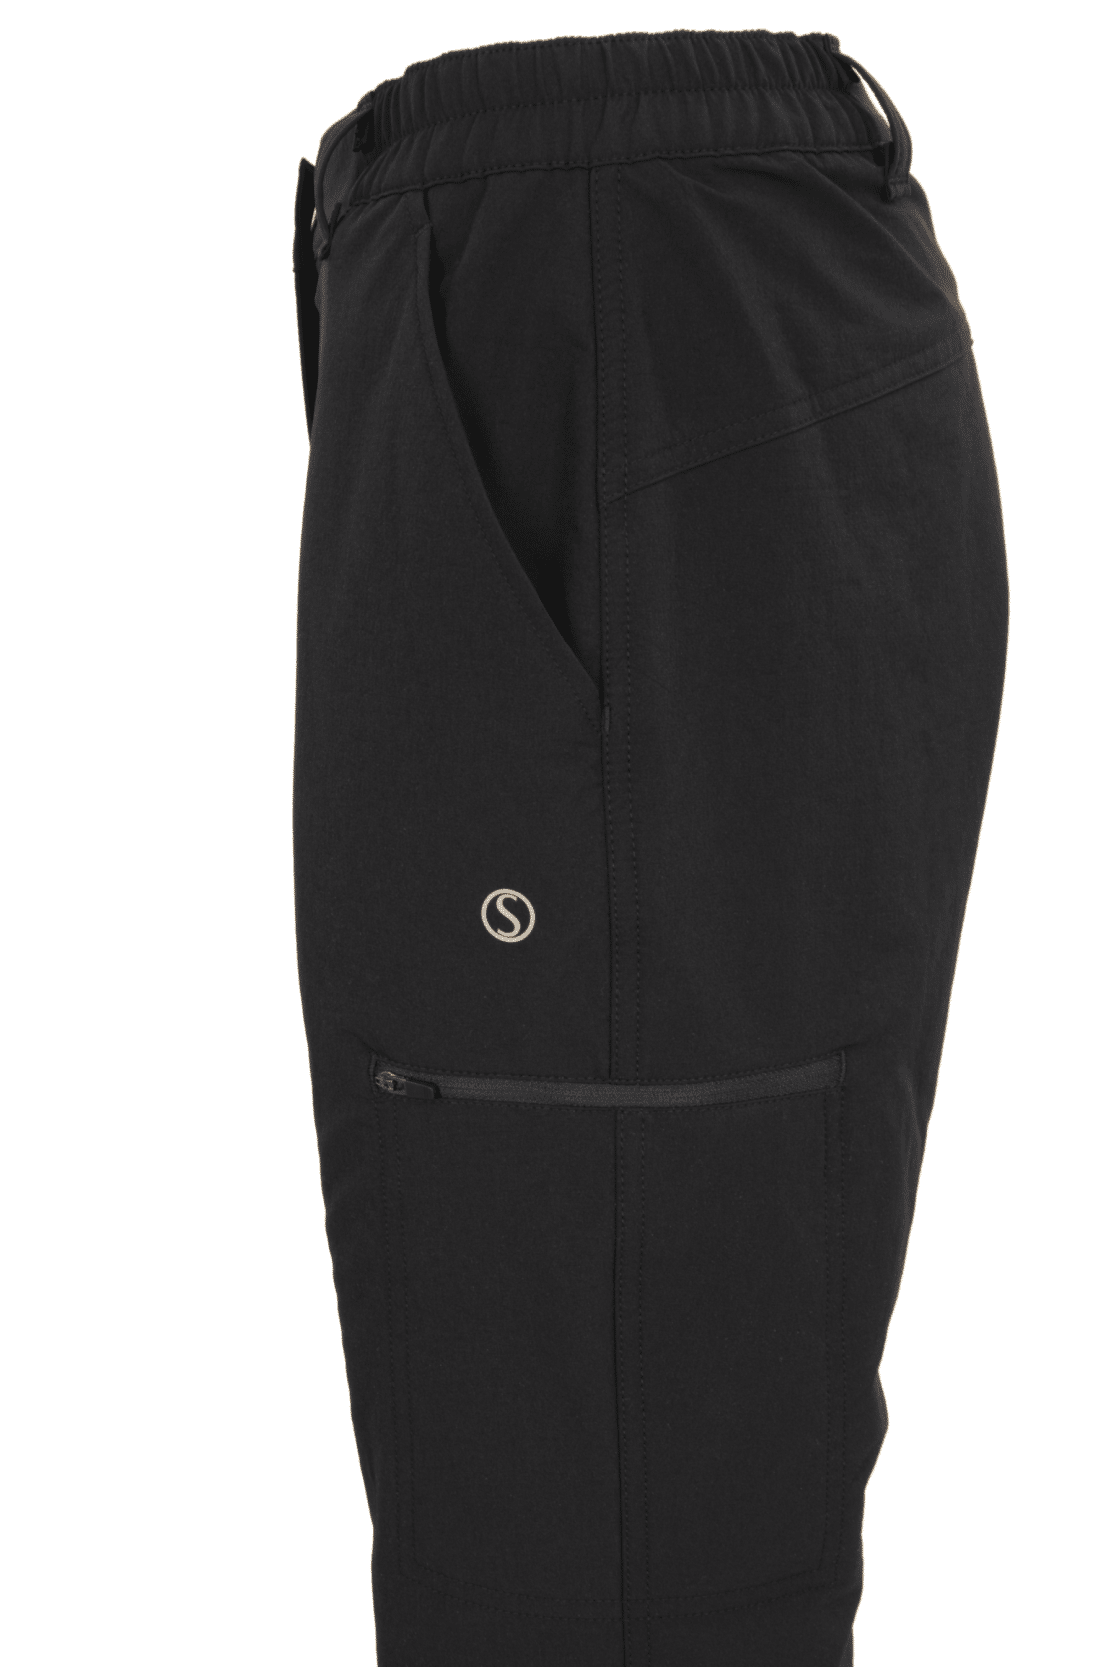 Craghoppers KiwiPro Winter Lined Trousers  Drifters Adventure Centre